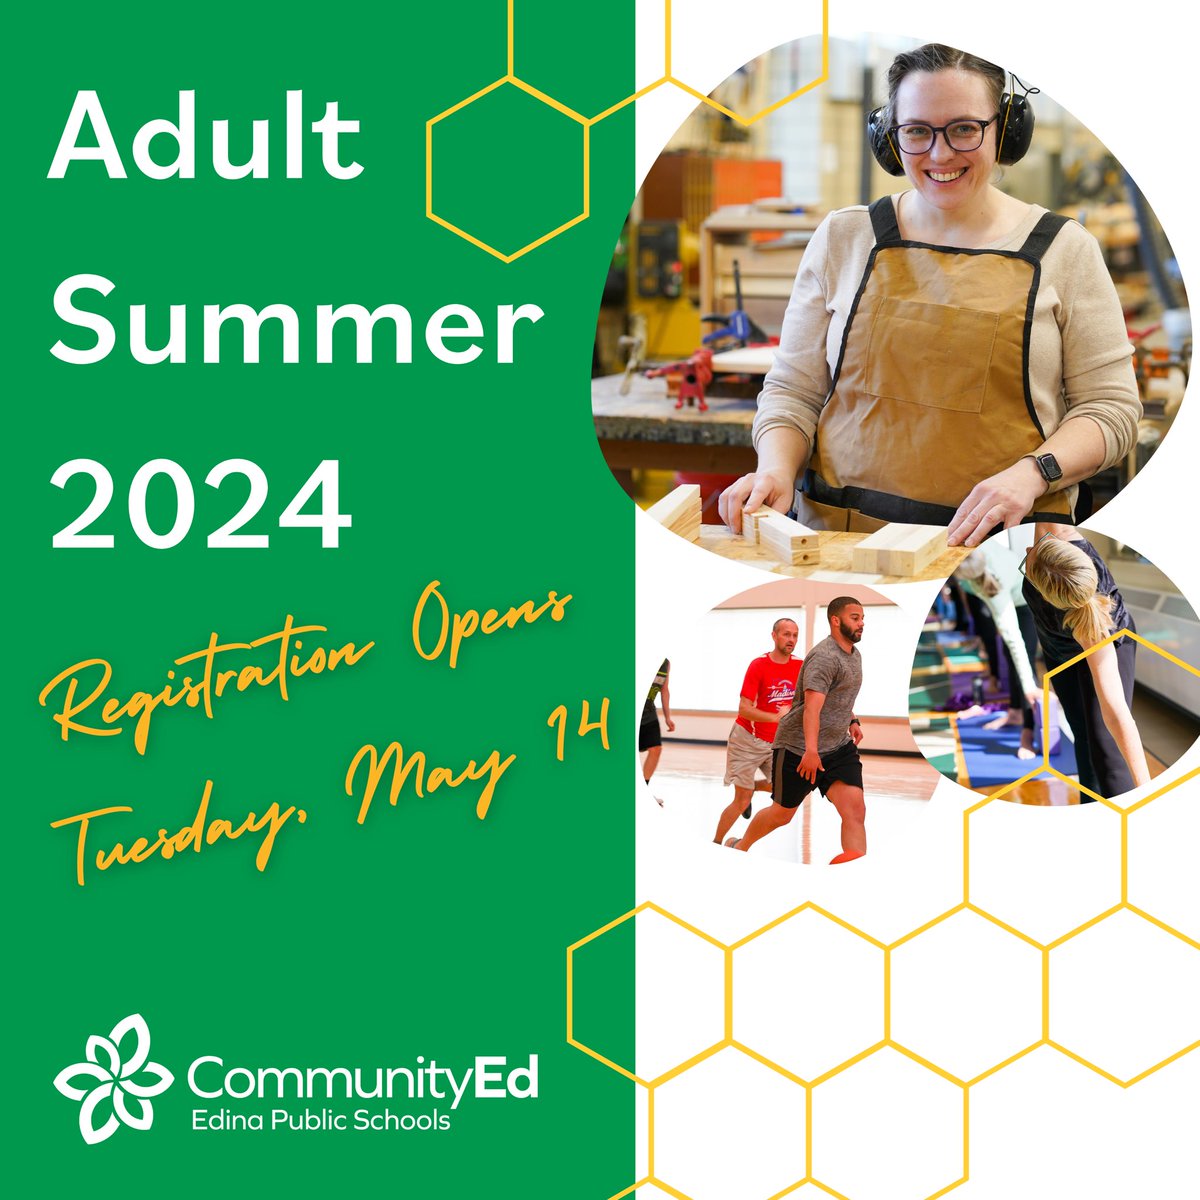 Edina Community Ed Adult Summer Registration opens May 14th‼️ Plan ahead at 𝙚𝙙𝙞𝙣𝙖𝙘𝙤𝙢𝙢𝙪𝙣𝙞𝙩𝙮𝙚𝙙.𝙘𝙤𝙢/𝙨𝙪𝙢𝙢𝙚𝙧2024 to see all class, programs and events offered for adults this summer. #lifelonglearning #discoverpossibilities #thrive #edinaschools